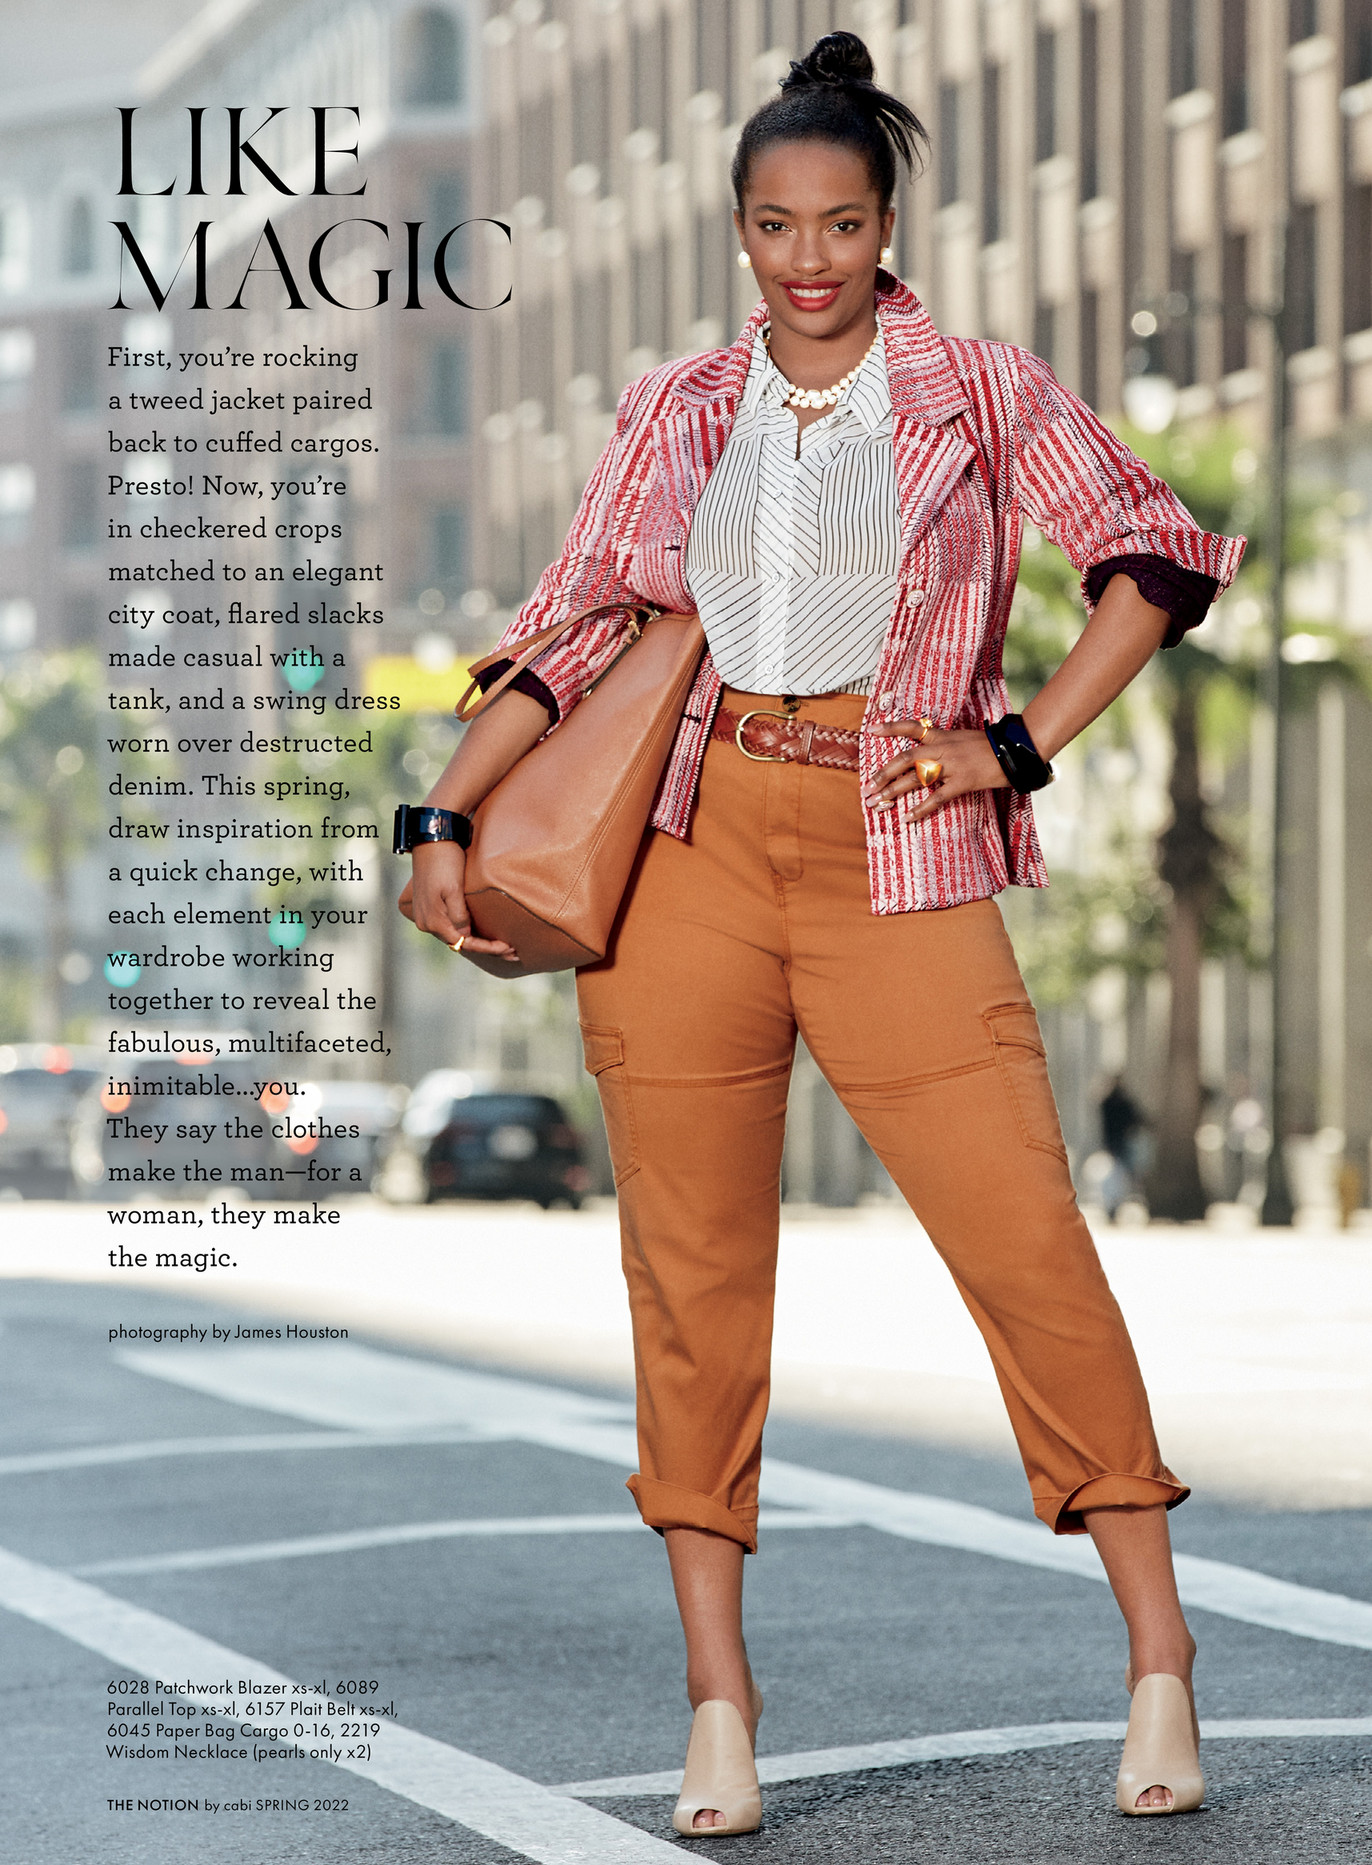 Cabi - Spring 2022 Notion - Page 28-29